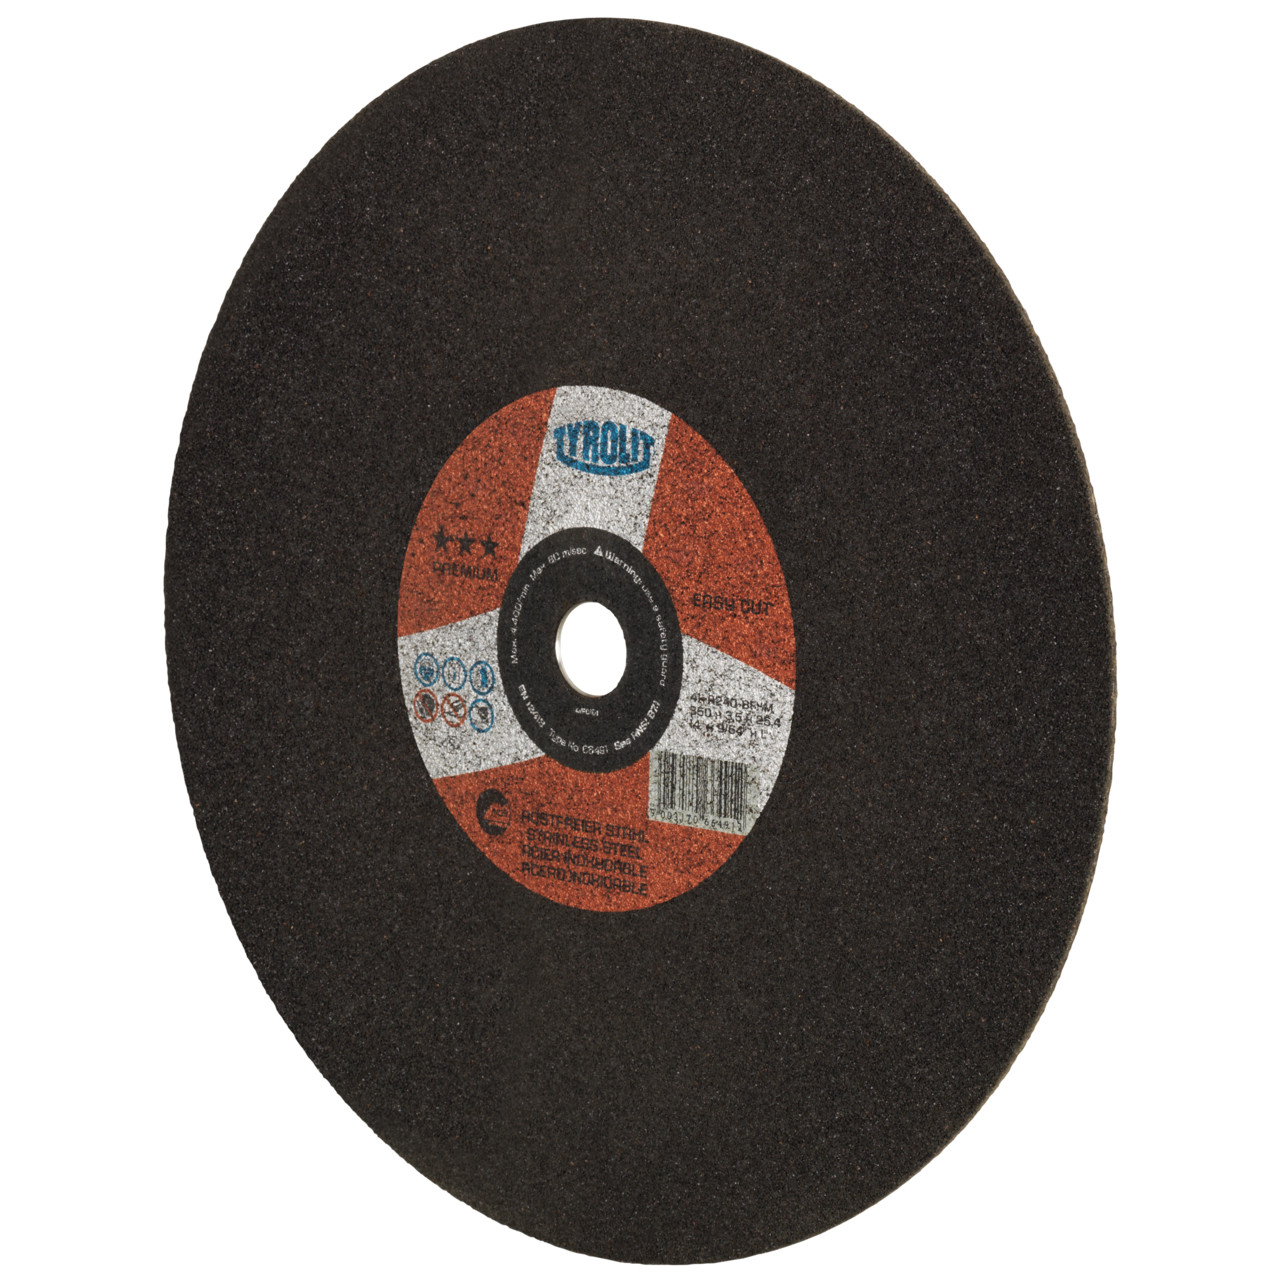 Tyrolit Cutting discs DxDxH 350x3.5x25.4 For stainless steel, shape: 41 - straight version, Art. 66491